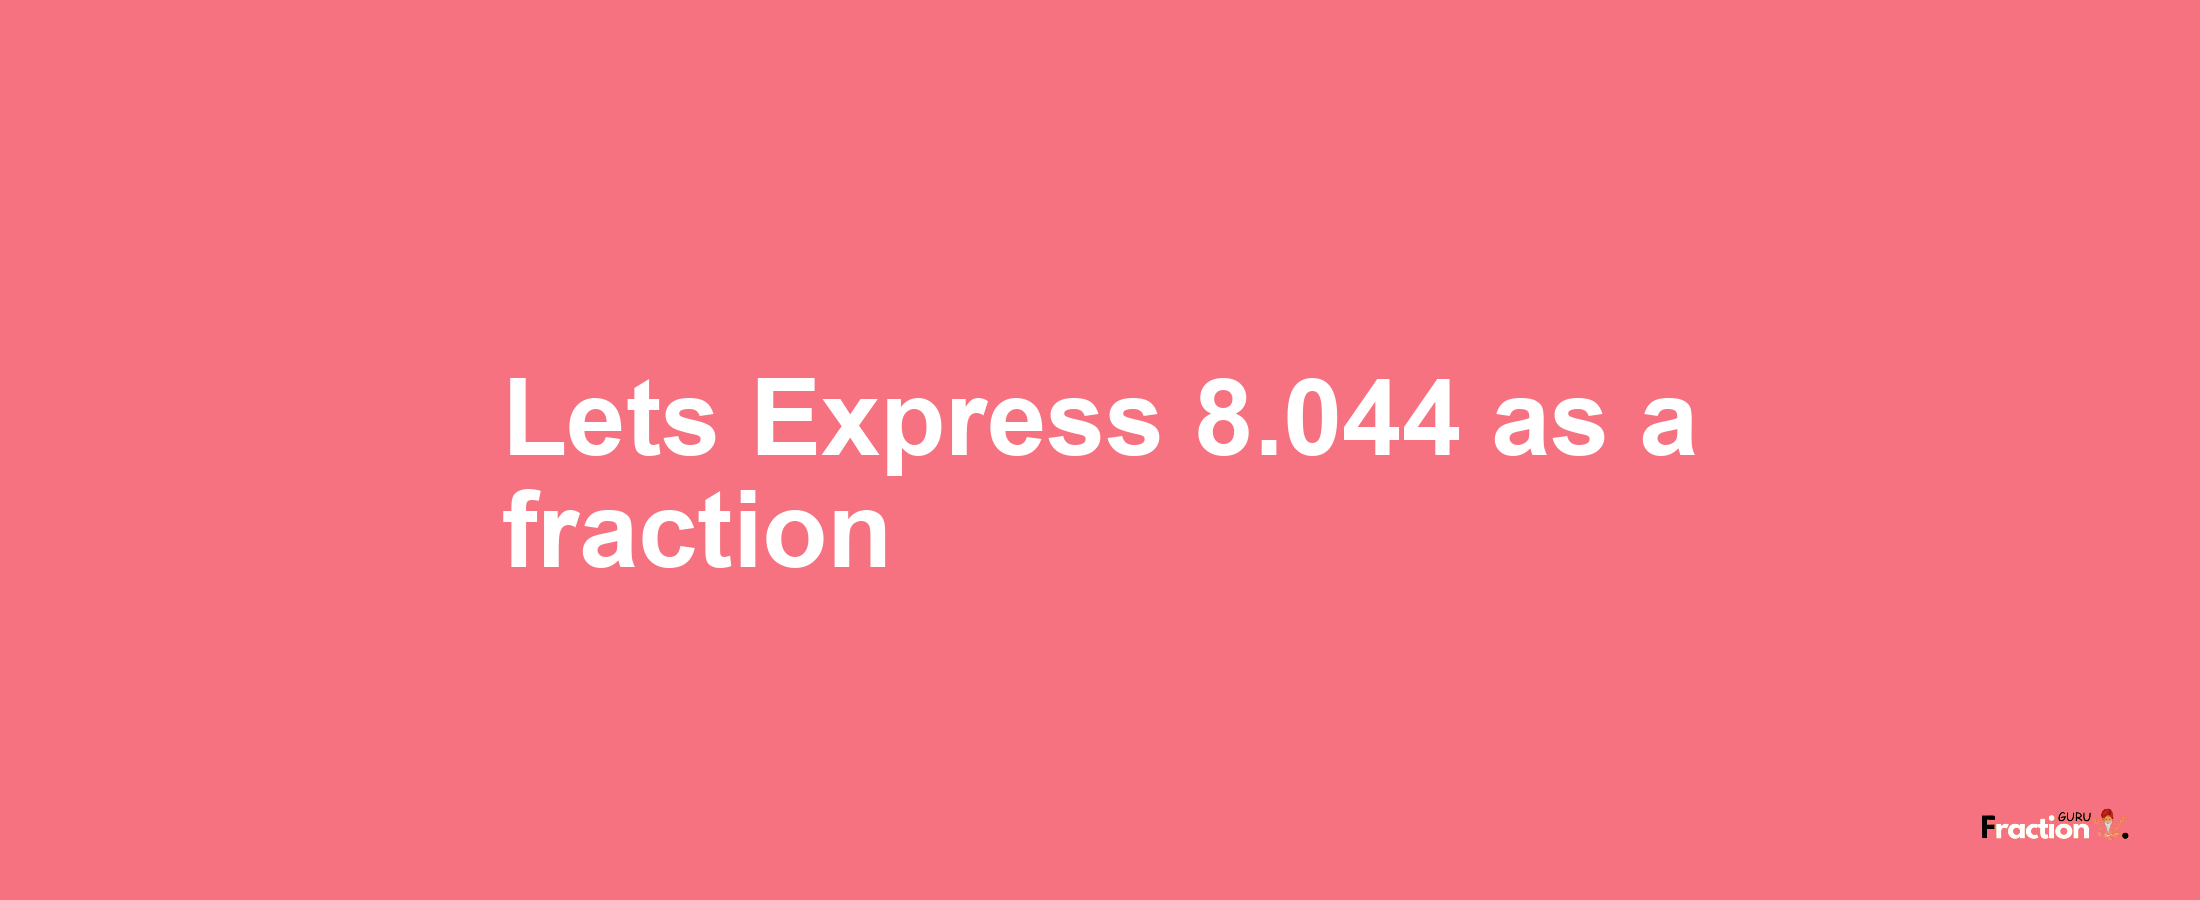 Lets Express 8.044 as afraction